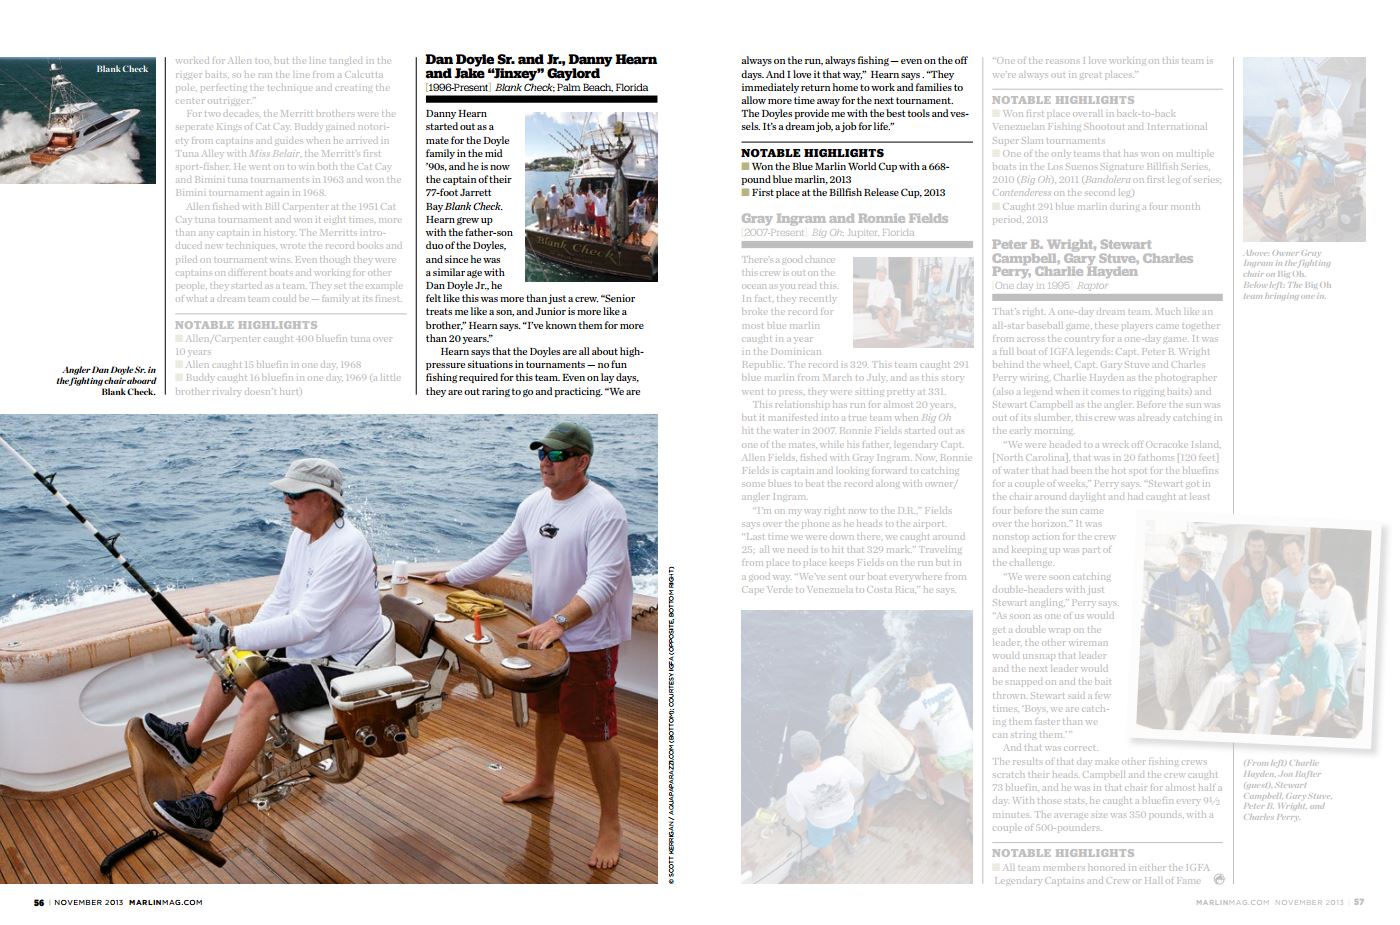 Dream Teams: the Blank Check Crew and Owners - Jarrett Bay Boatworks